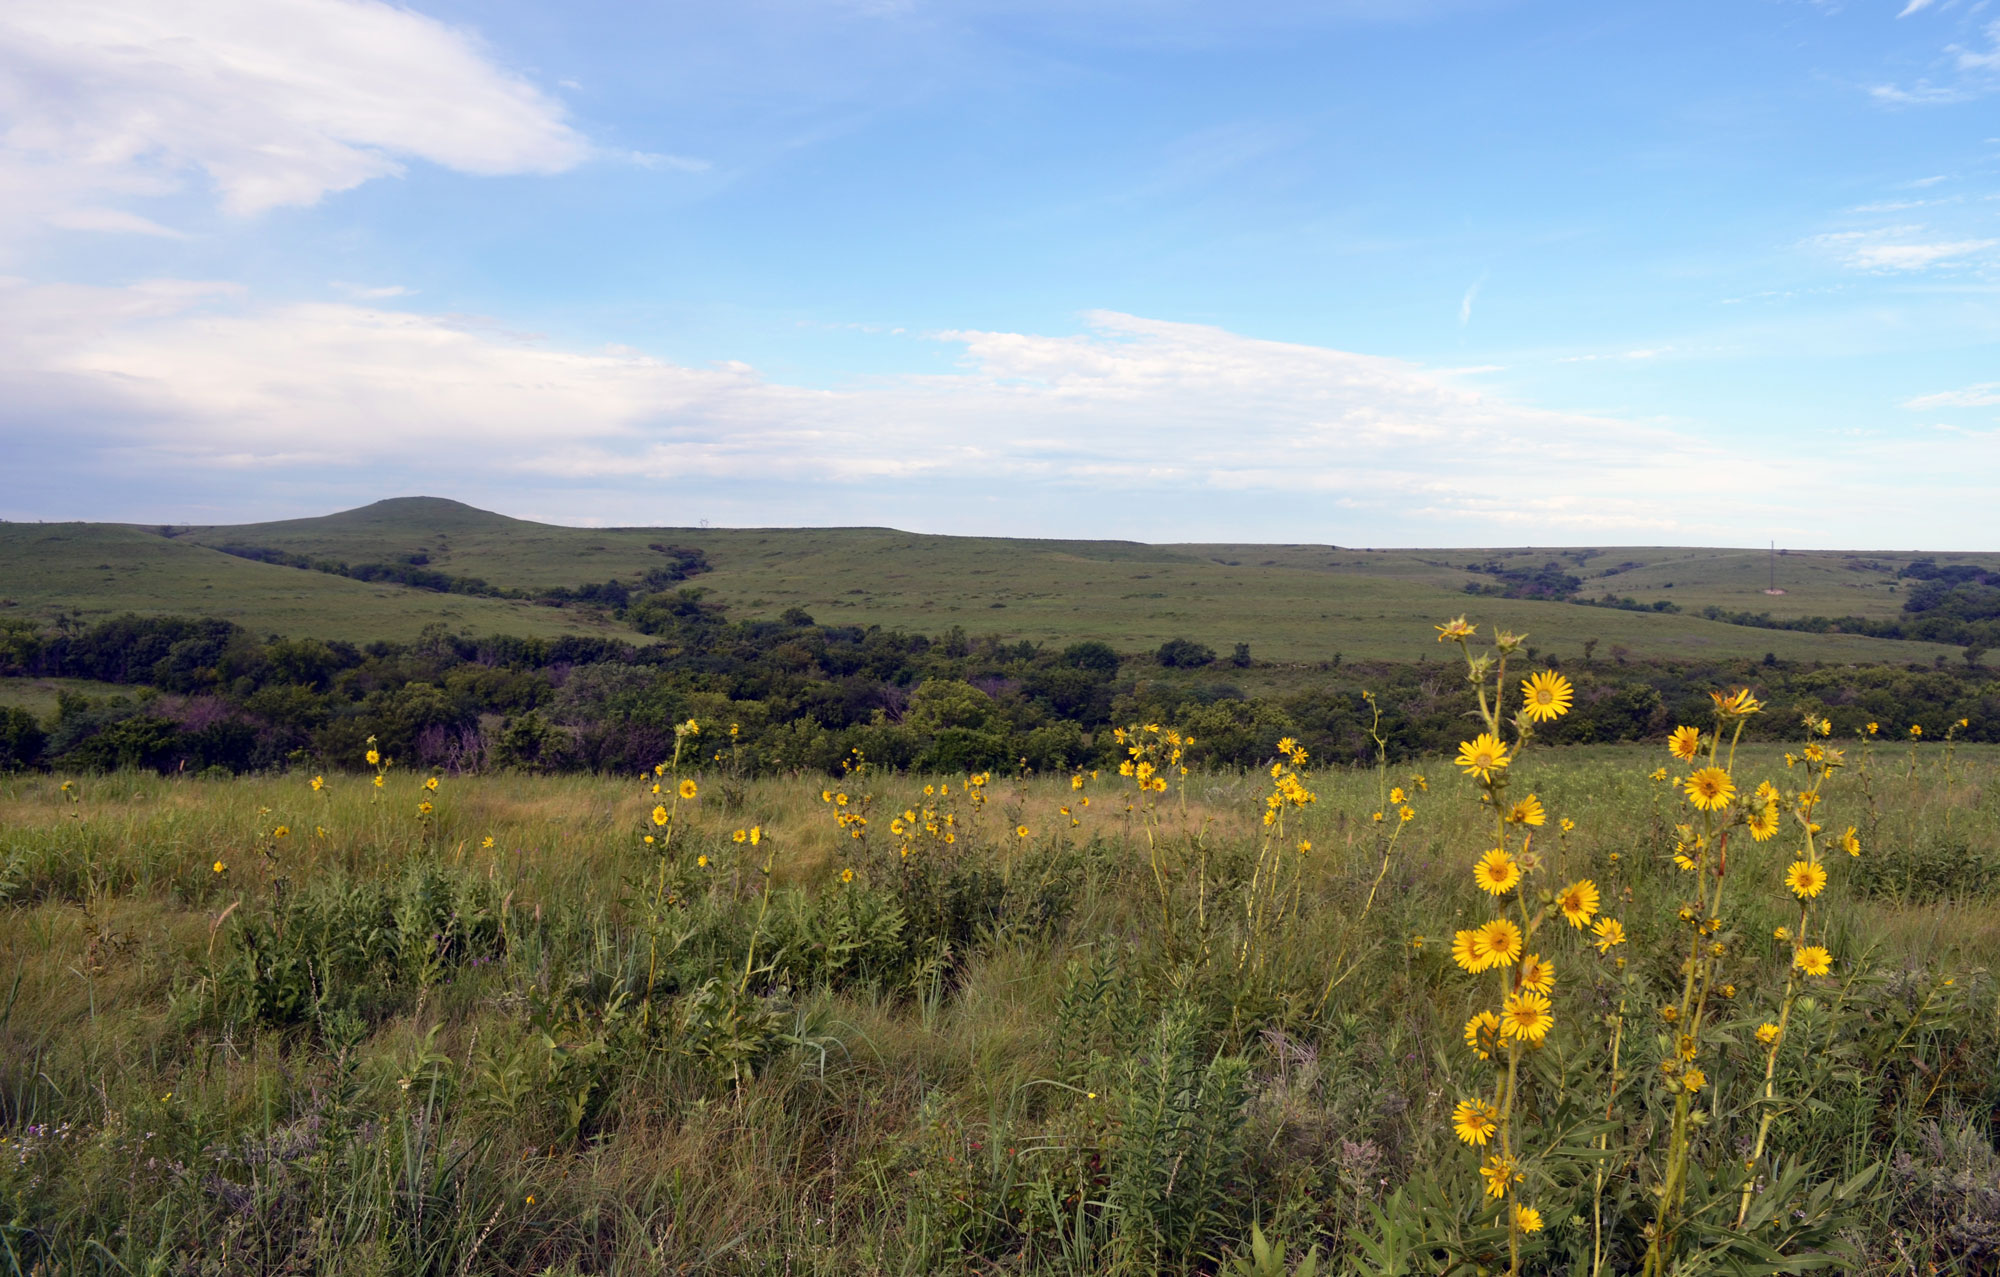 Photograph of Konza Prairie, Flint Hills, Kansas. Landscape with low hills covered in grasses, forbs, and shrubs. Some wild sunflowers (yellow petals and yellow centers) are in the foreground.